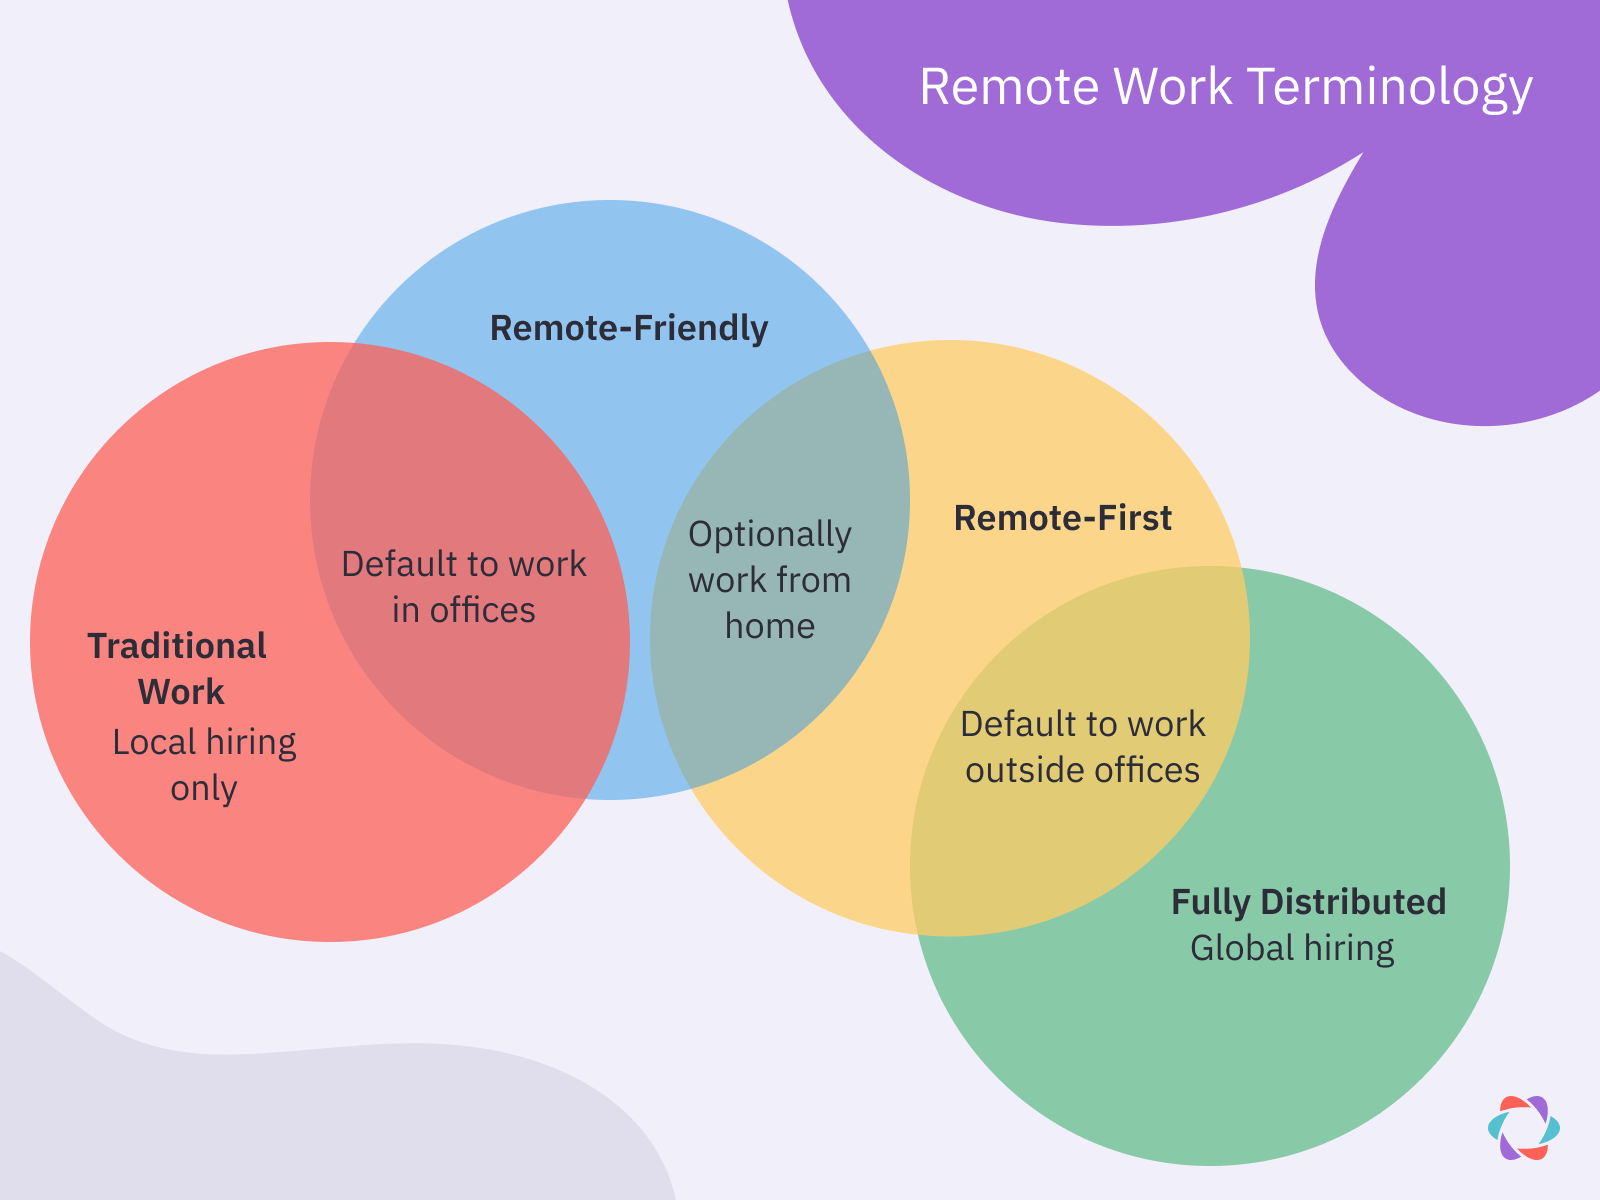 Remote work terms are related but not the same.